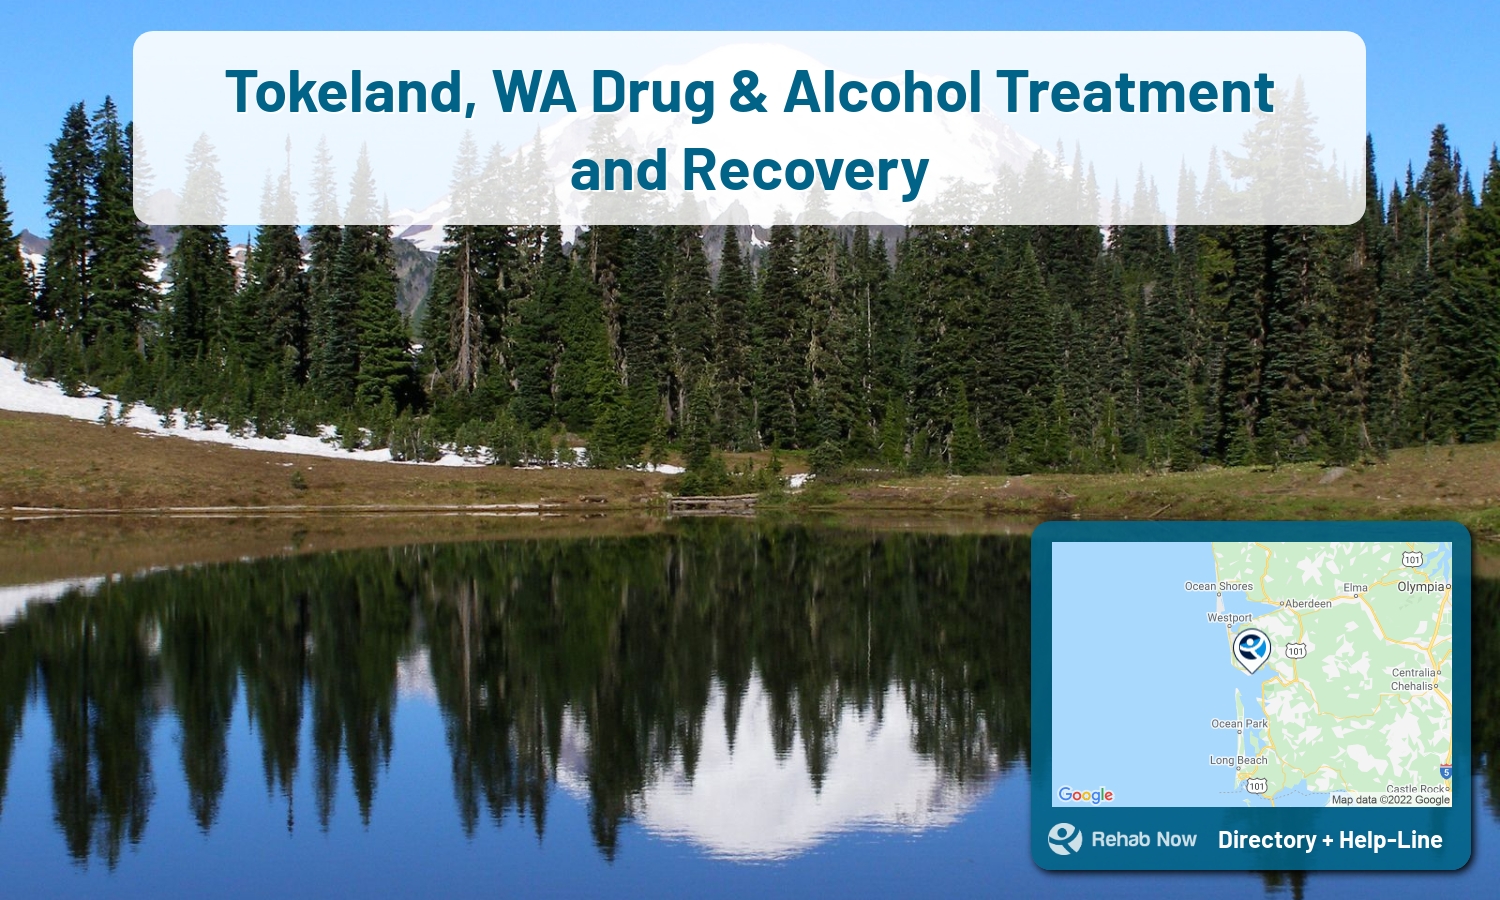 List of alcohol and drug treatment centers near you in Tokeland, Washington. Research certifications, programs, methods, pricing, and more.